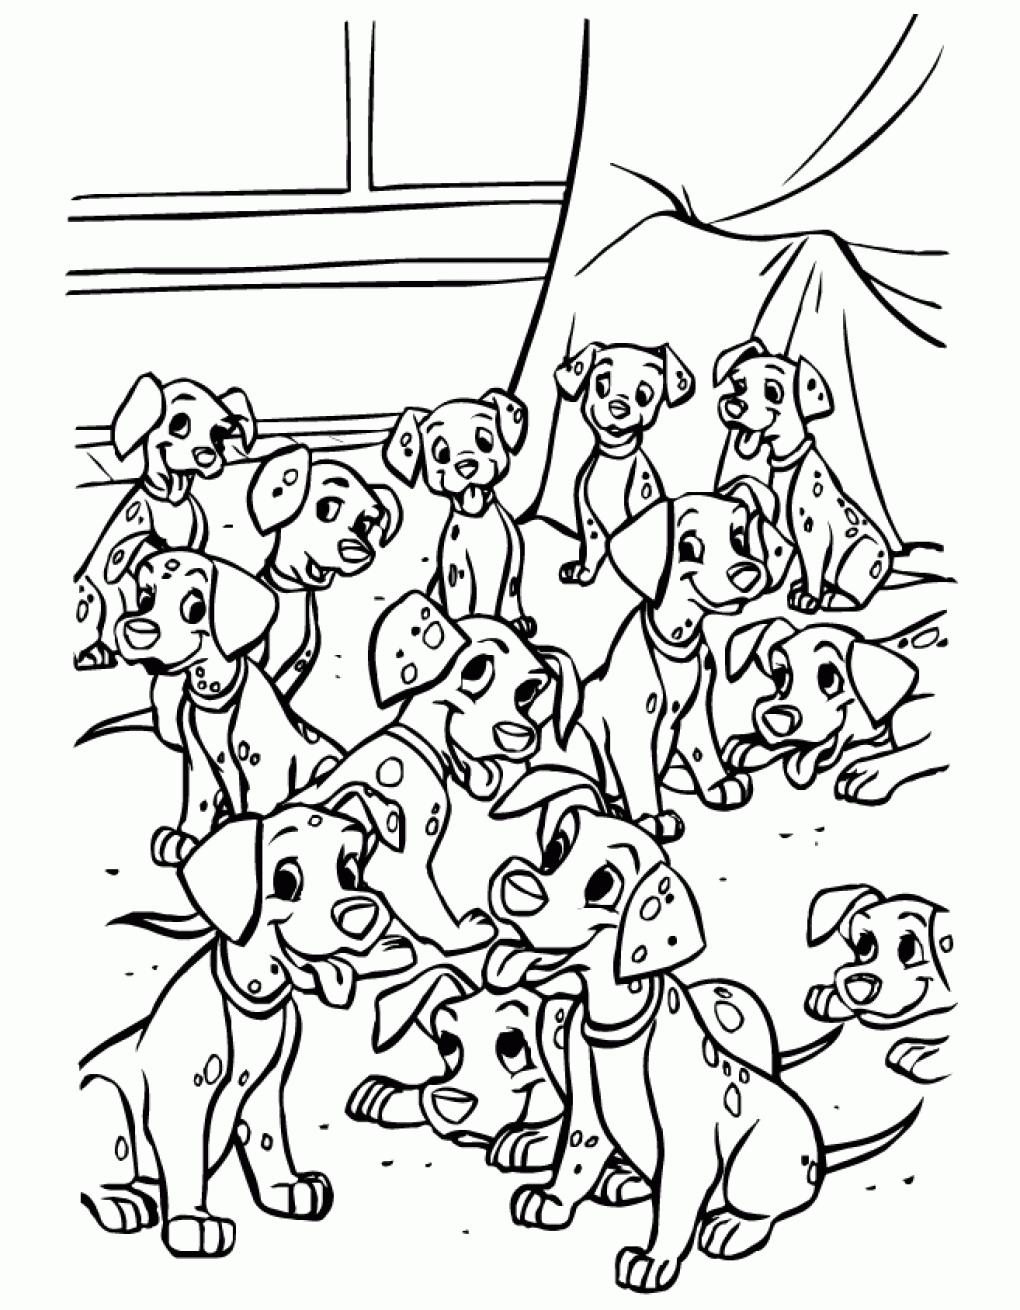 Image of The 101 Dalmatians to download and color 101 Dalmatians Kids